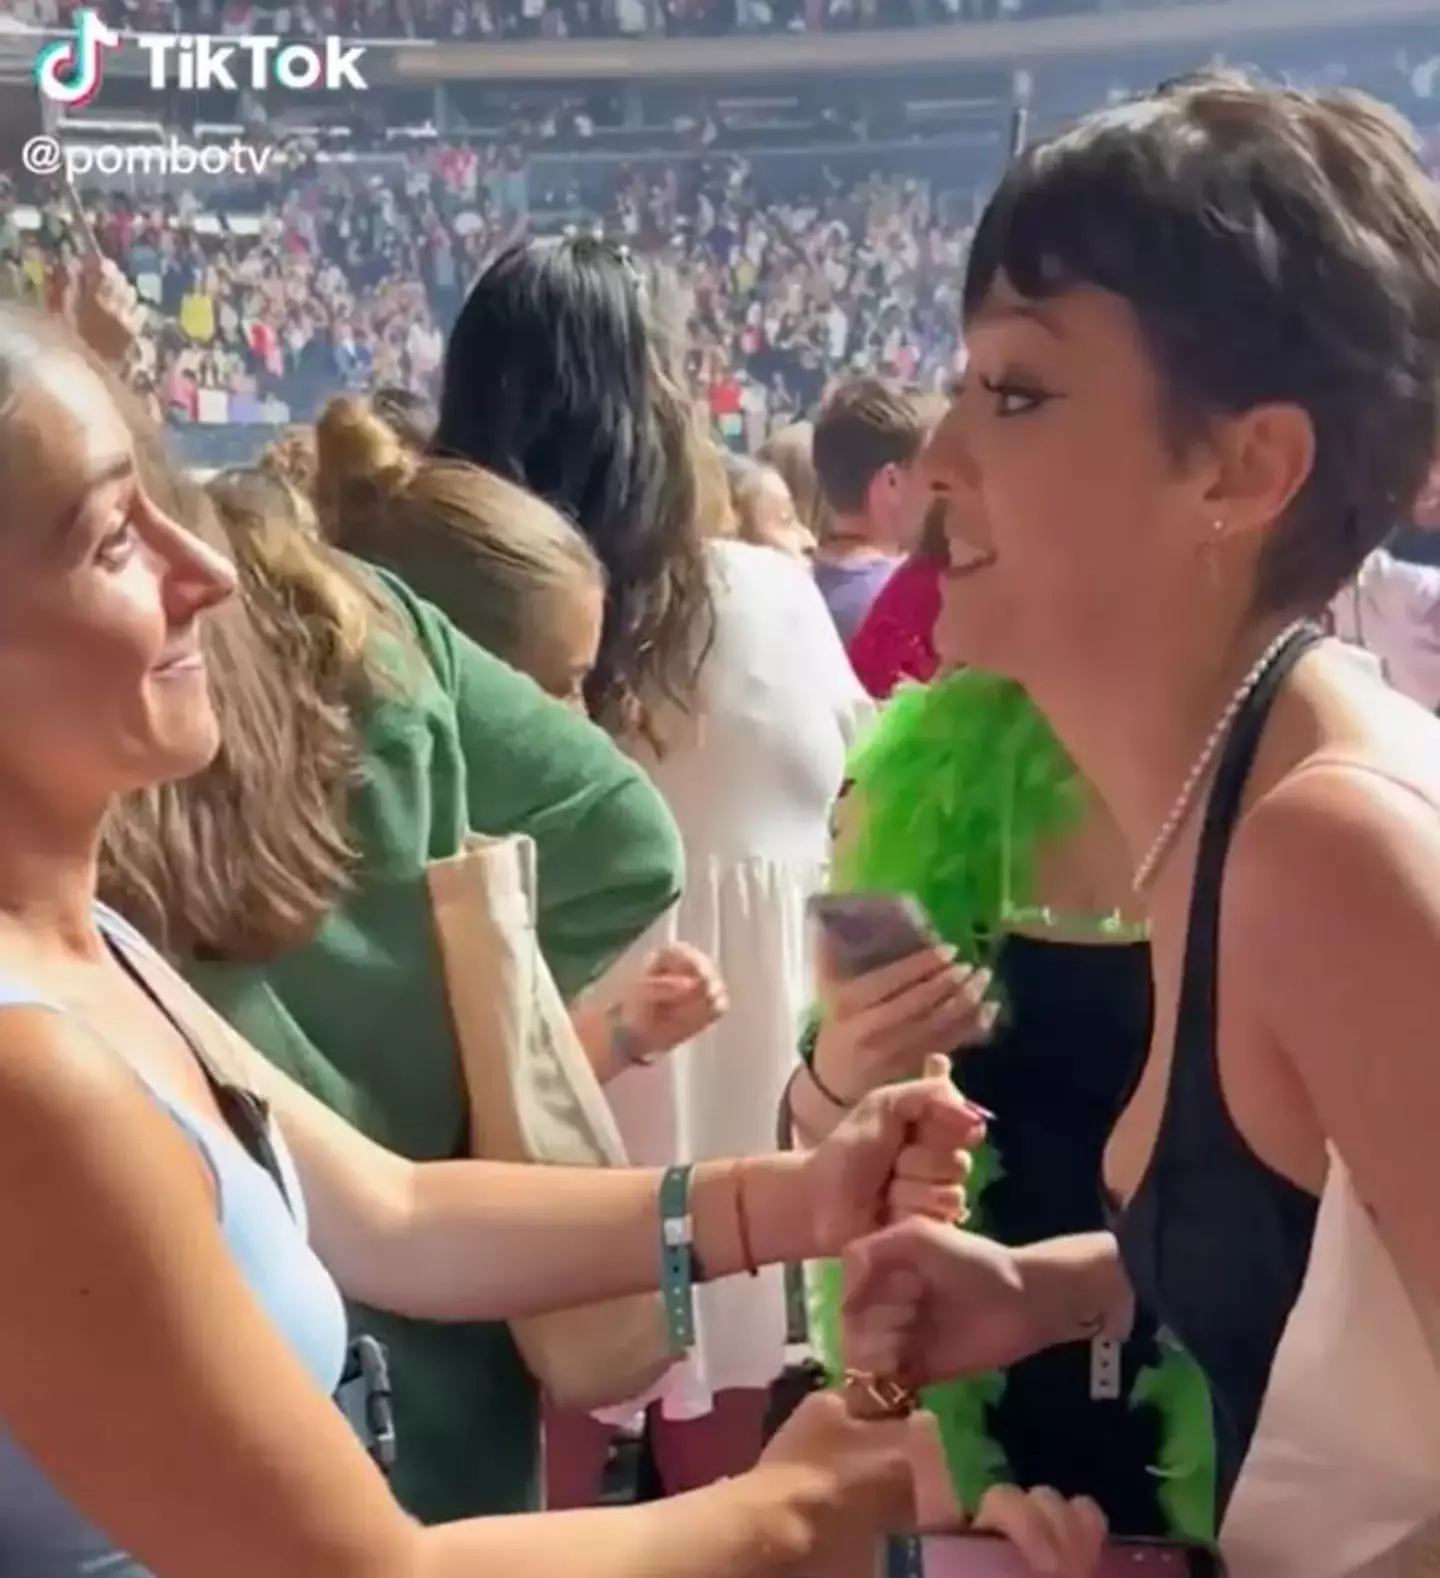 The two women fought over the drumstick.